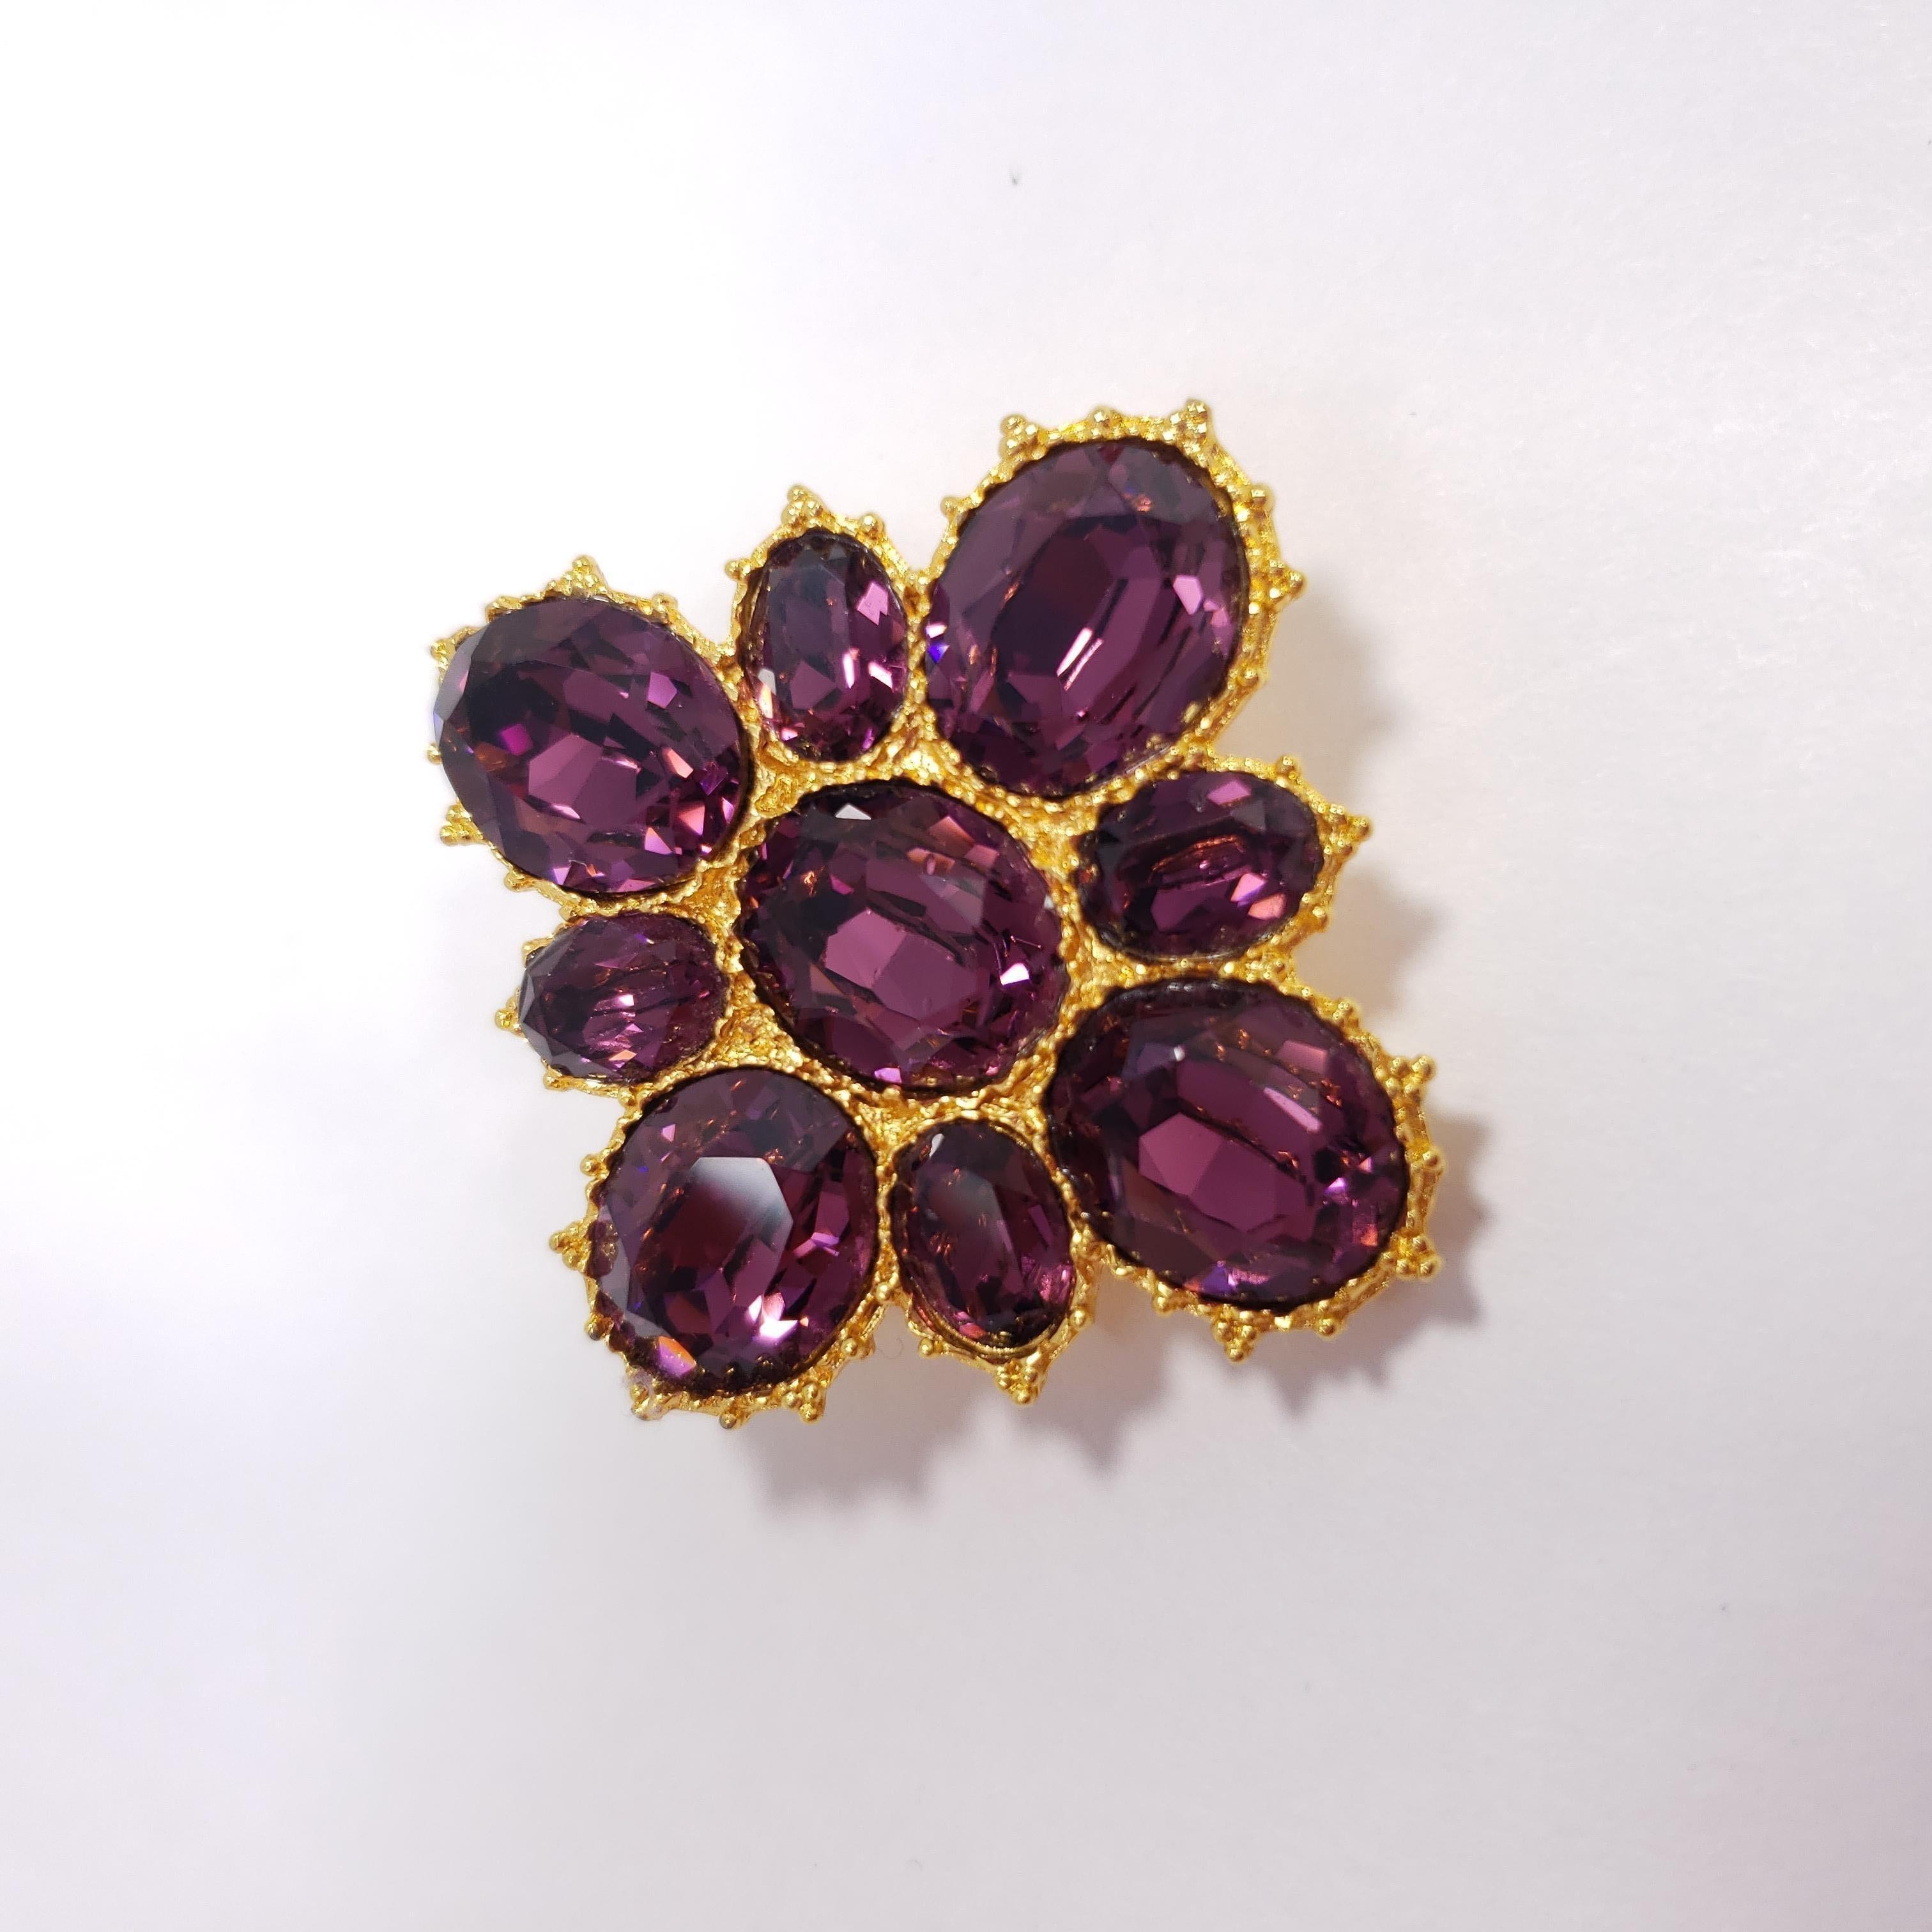 This glamorous 20th century Maltese cross-inspired pin is decorated with amethyst crystals. For a sophisticated and regal look!

Gold-plated. Made by Alva.

Marks / hallmarks / etc: Alva